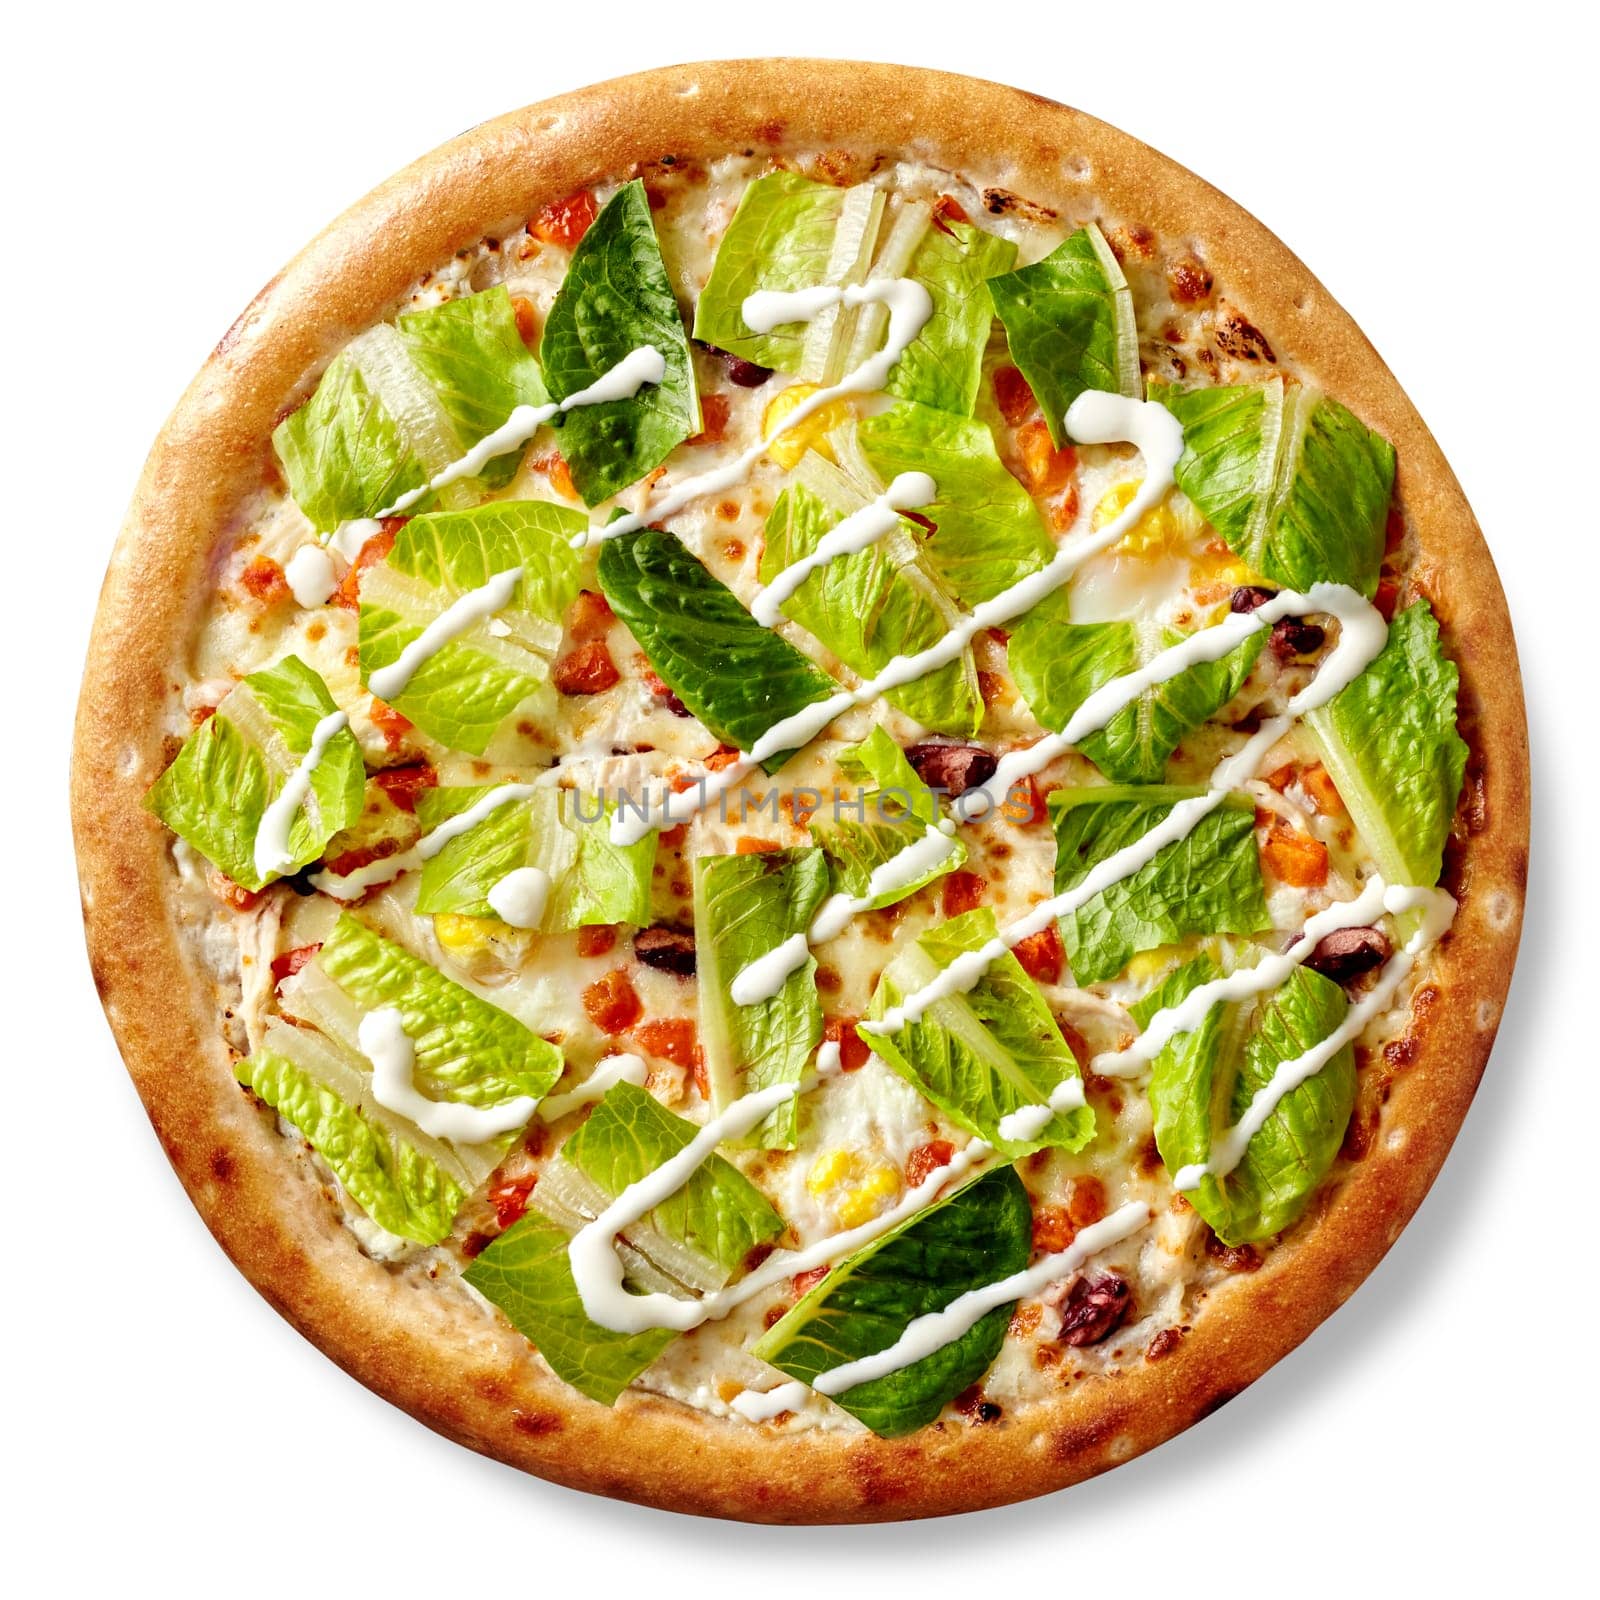 Top view of appetizing light pizza on yogurt base with mozzarella, chicken sous vide, tomato, red beans, quail eggs, fresh lettuce and cream cheese sauce isolated on white. Italian style cuisine